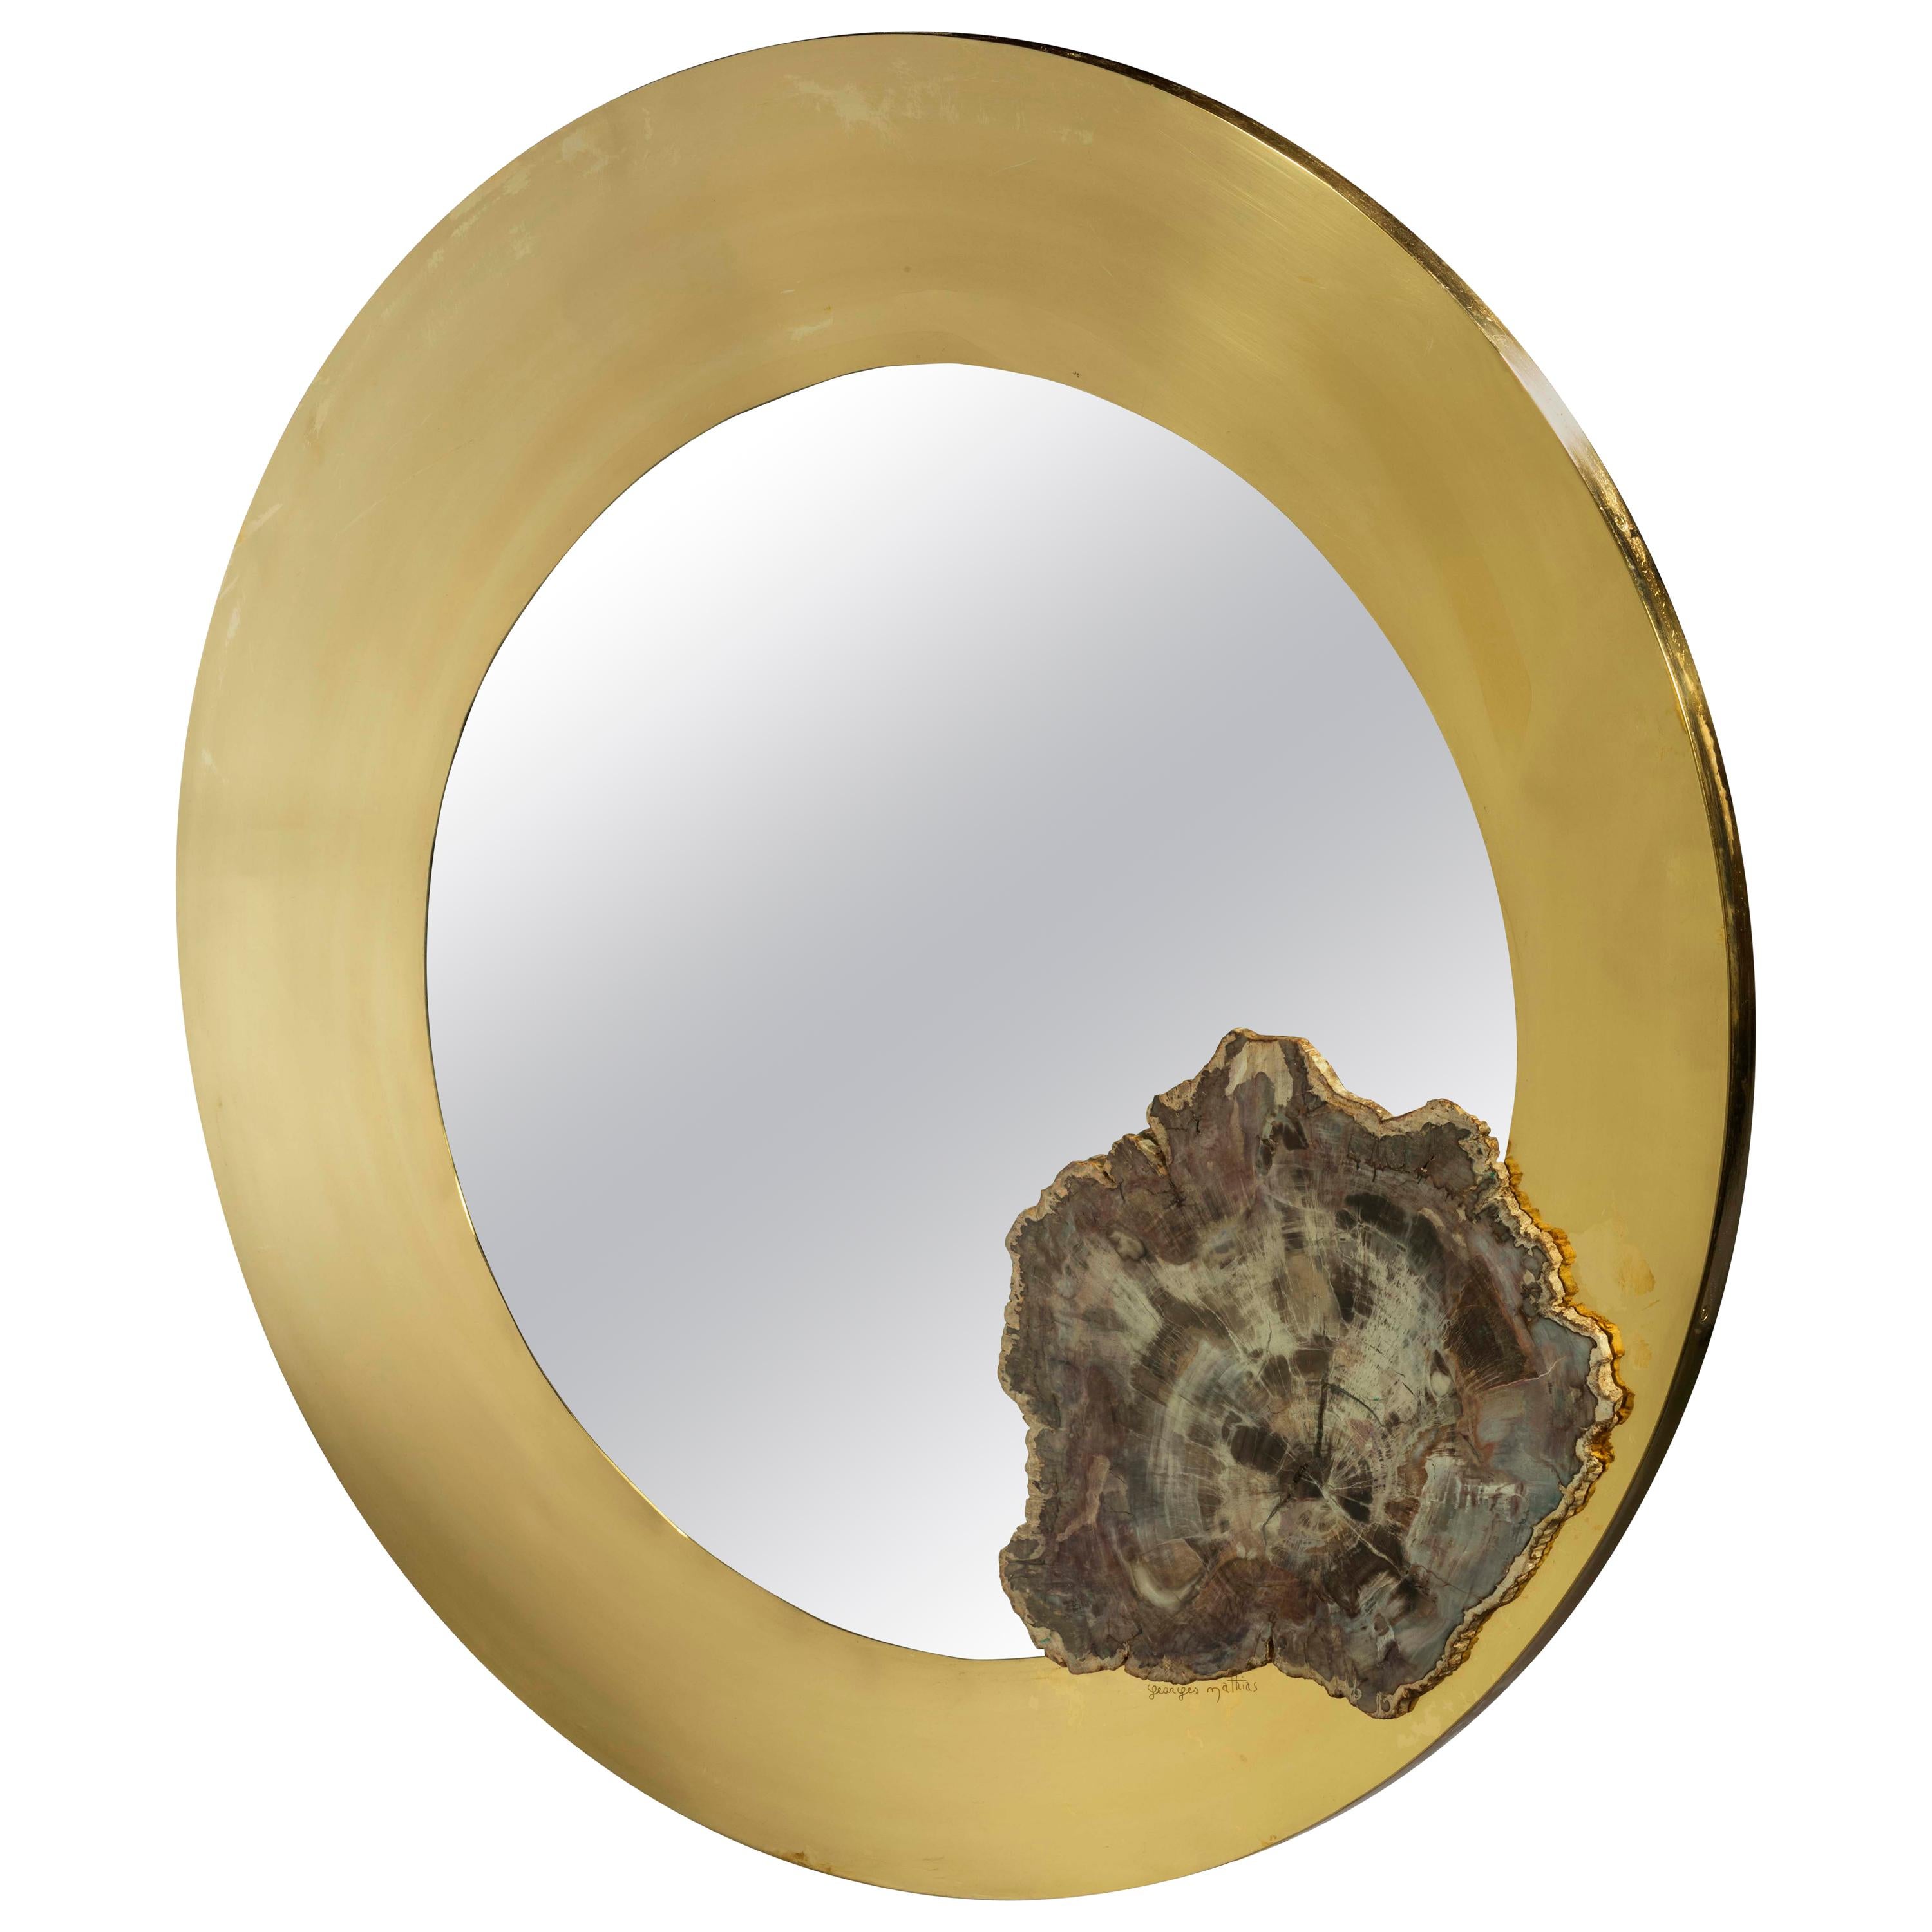 Stylish Acid Etched Brass and Fossilized Wood Circular Mirror by Georges Mathias